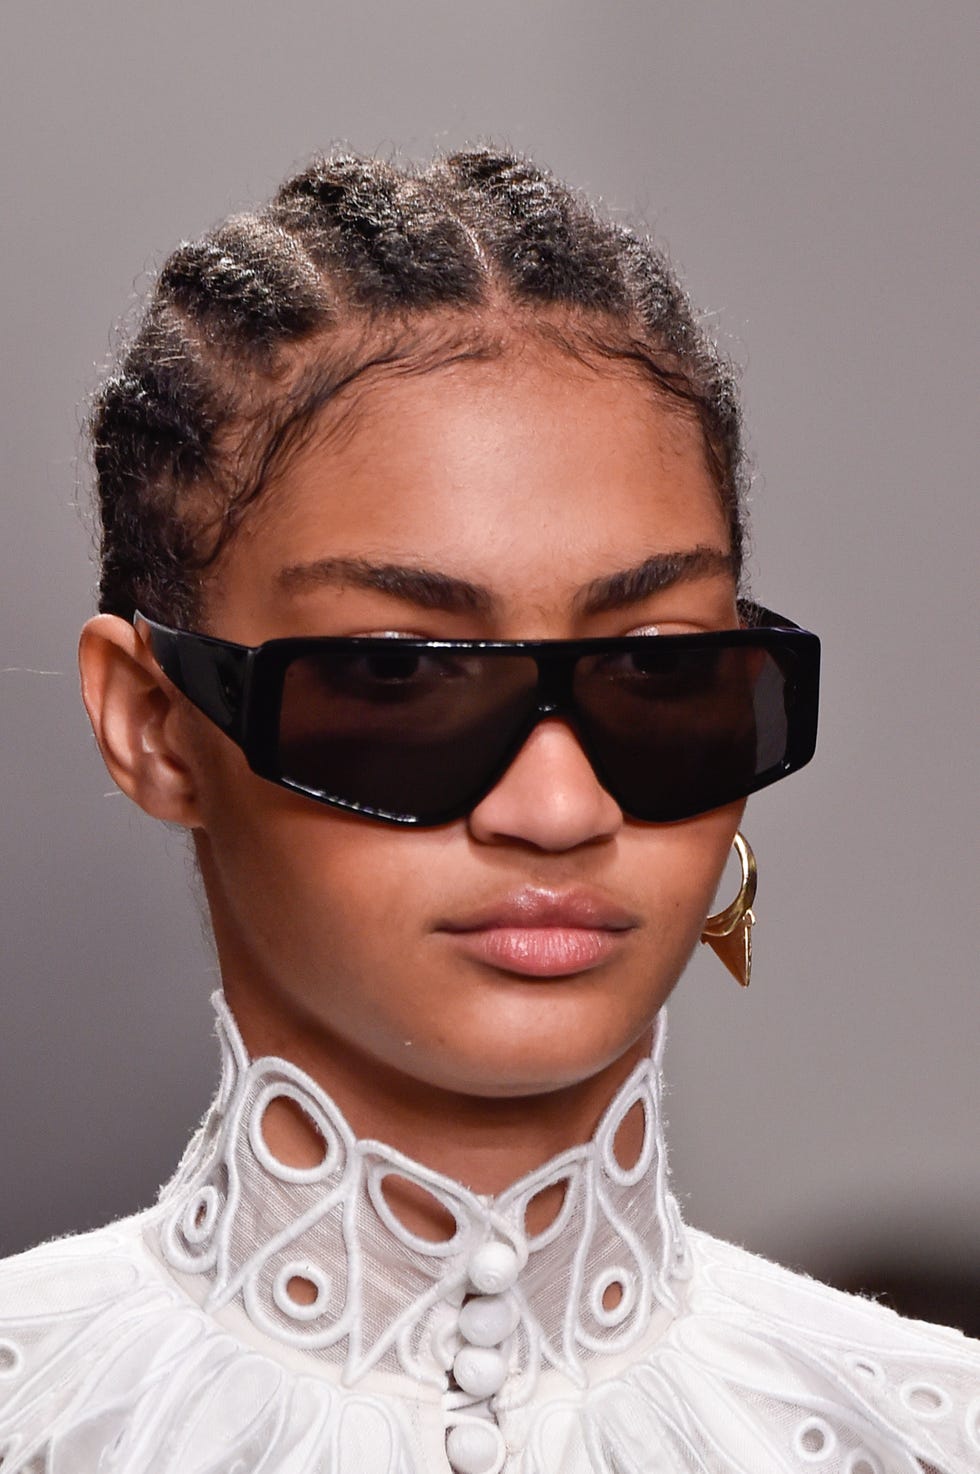 The Spring 2020 Sunglasses Trends Worth Knowing, According To